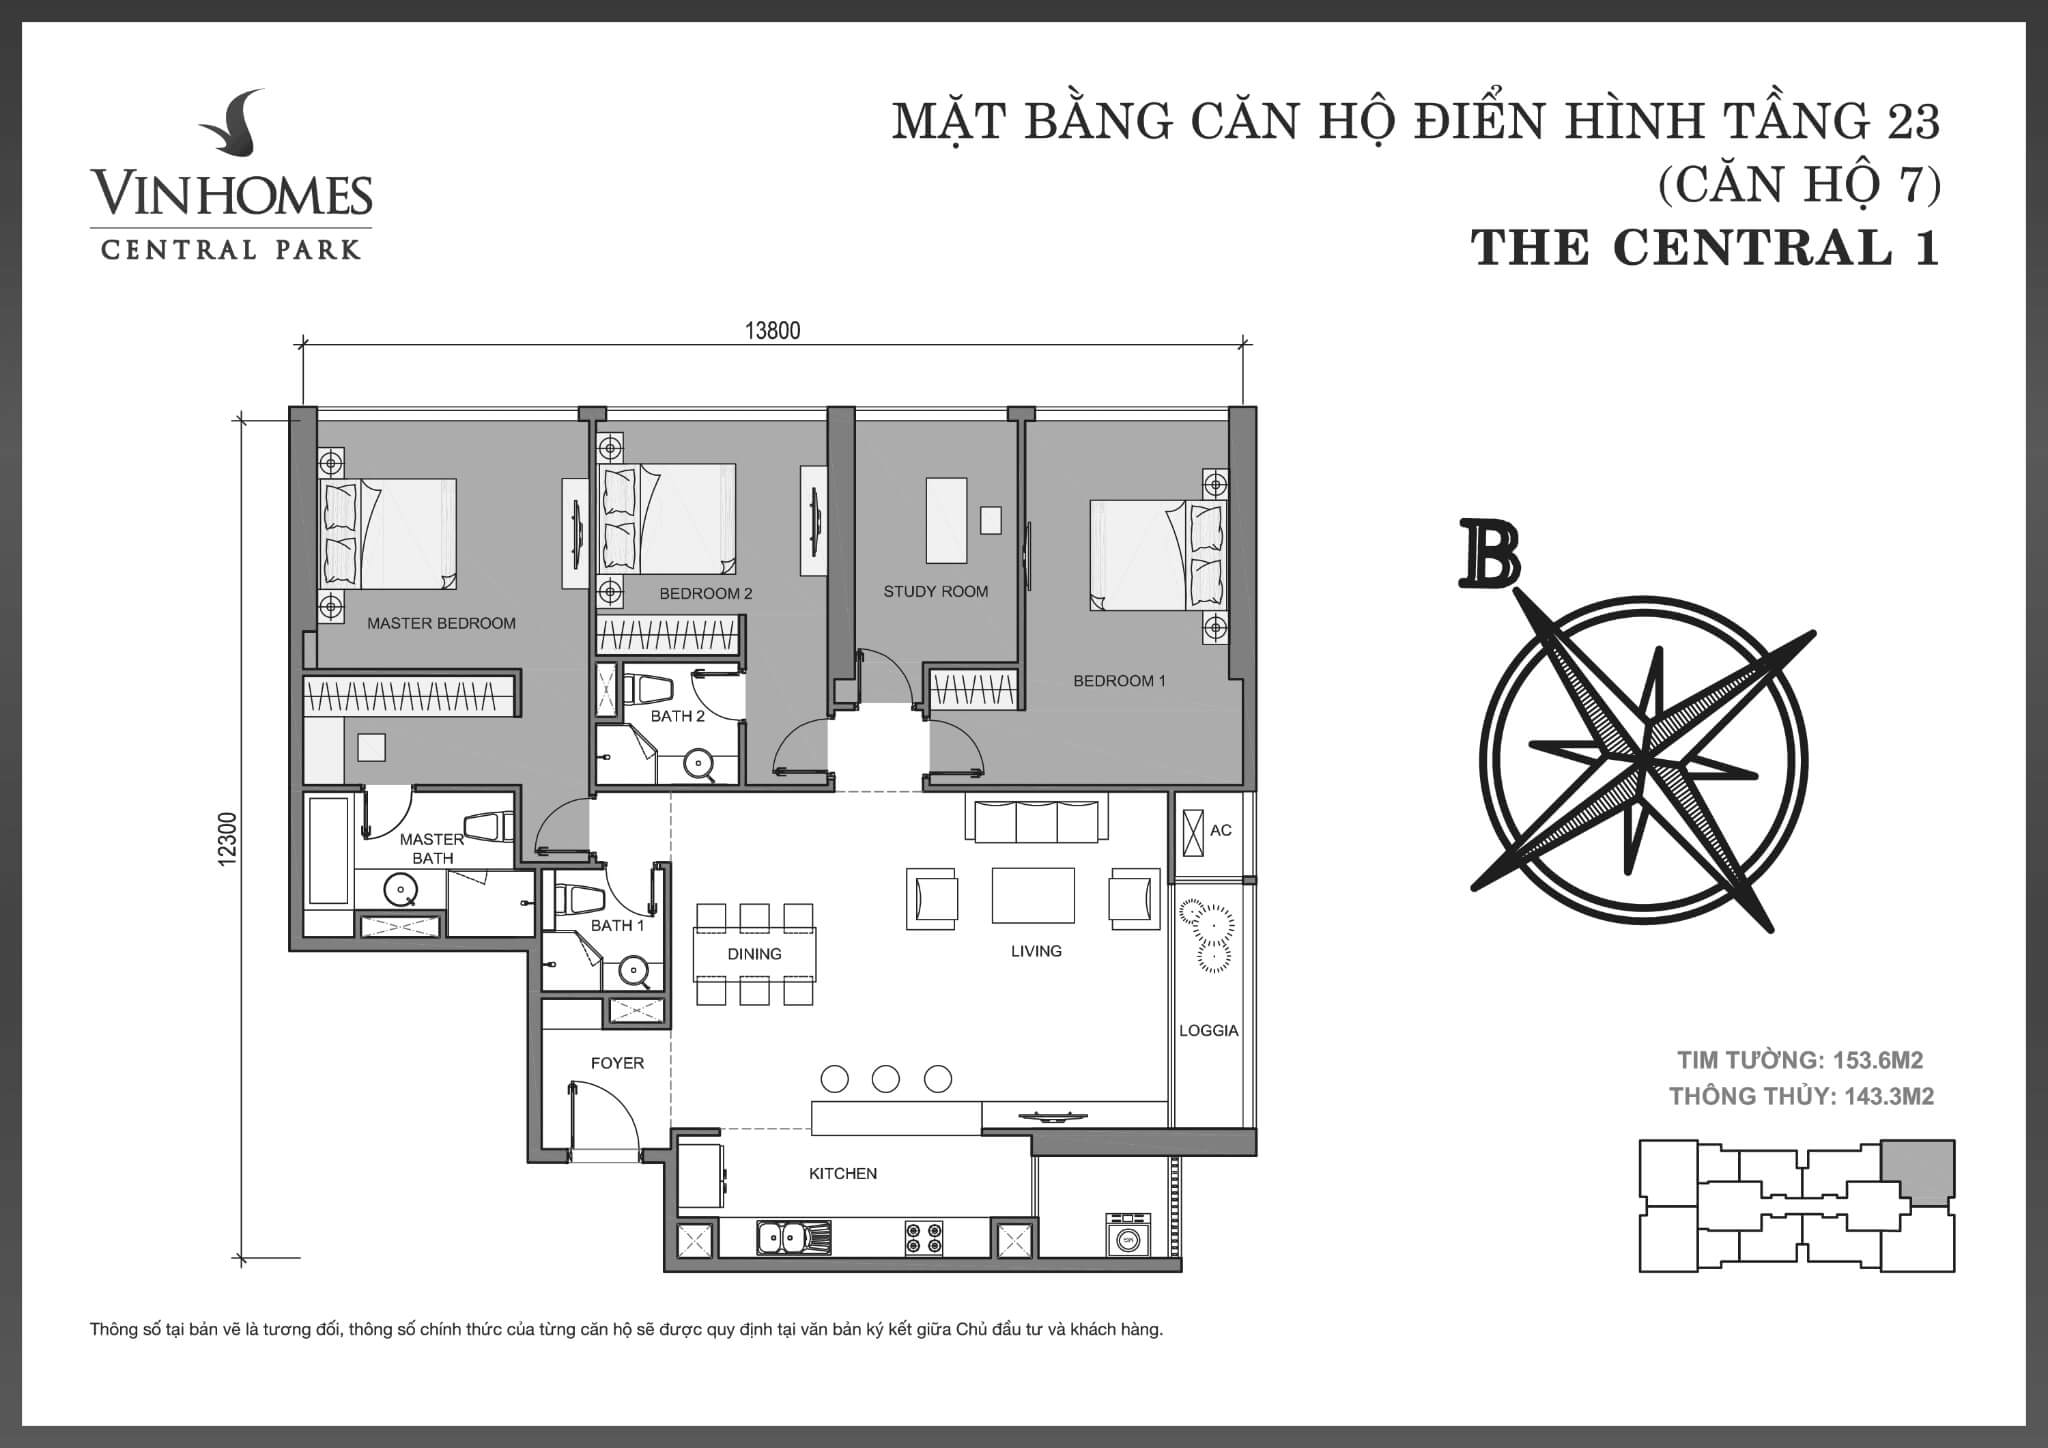 Layout C1-07 tầng 23 | Central 1 - Vinhomes Central Park